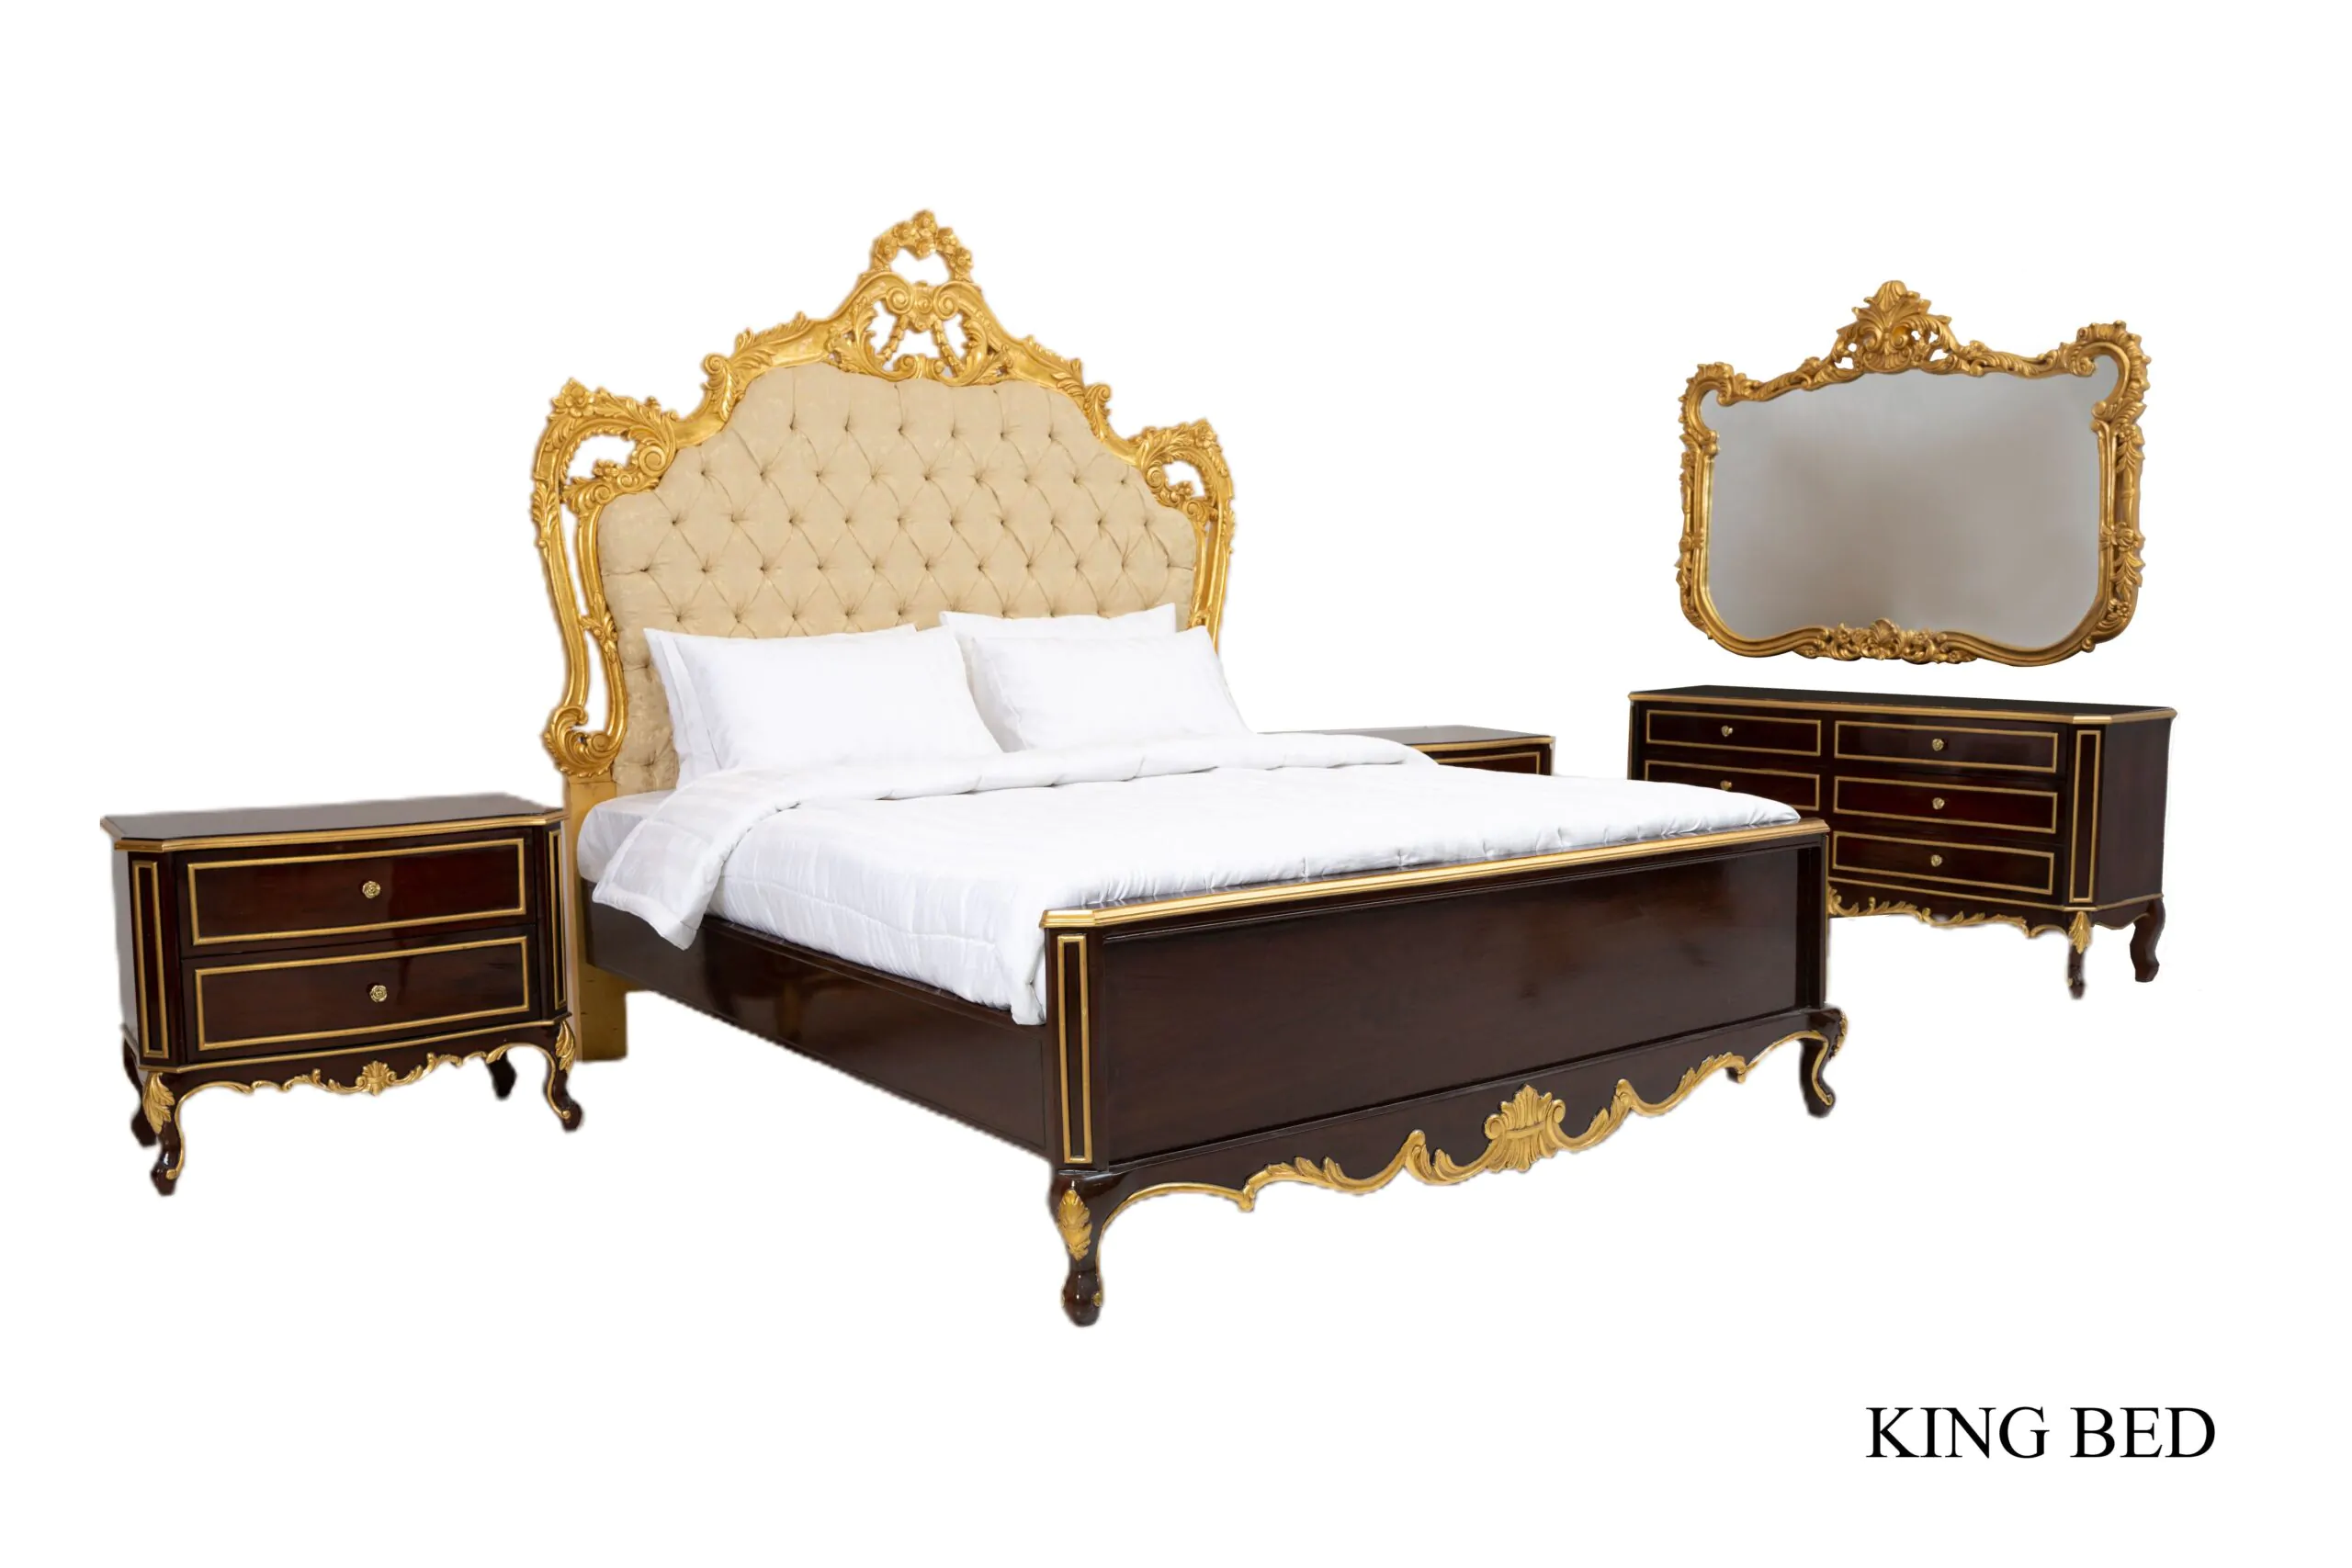 King Bed Price and Specification